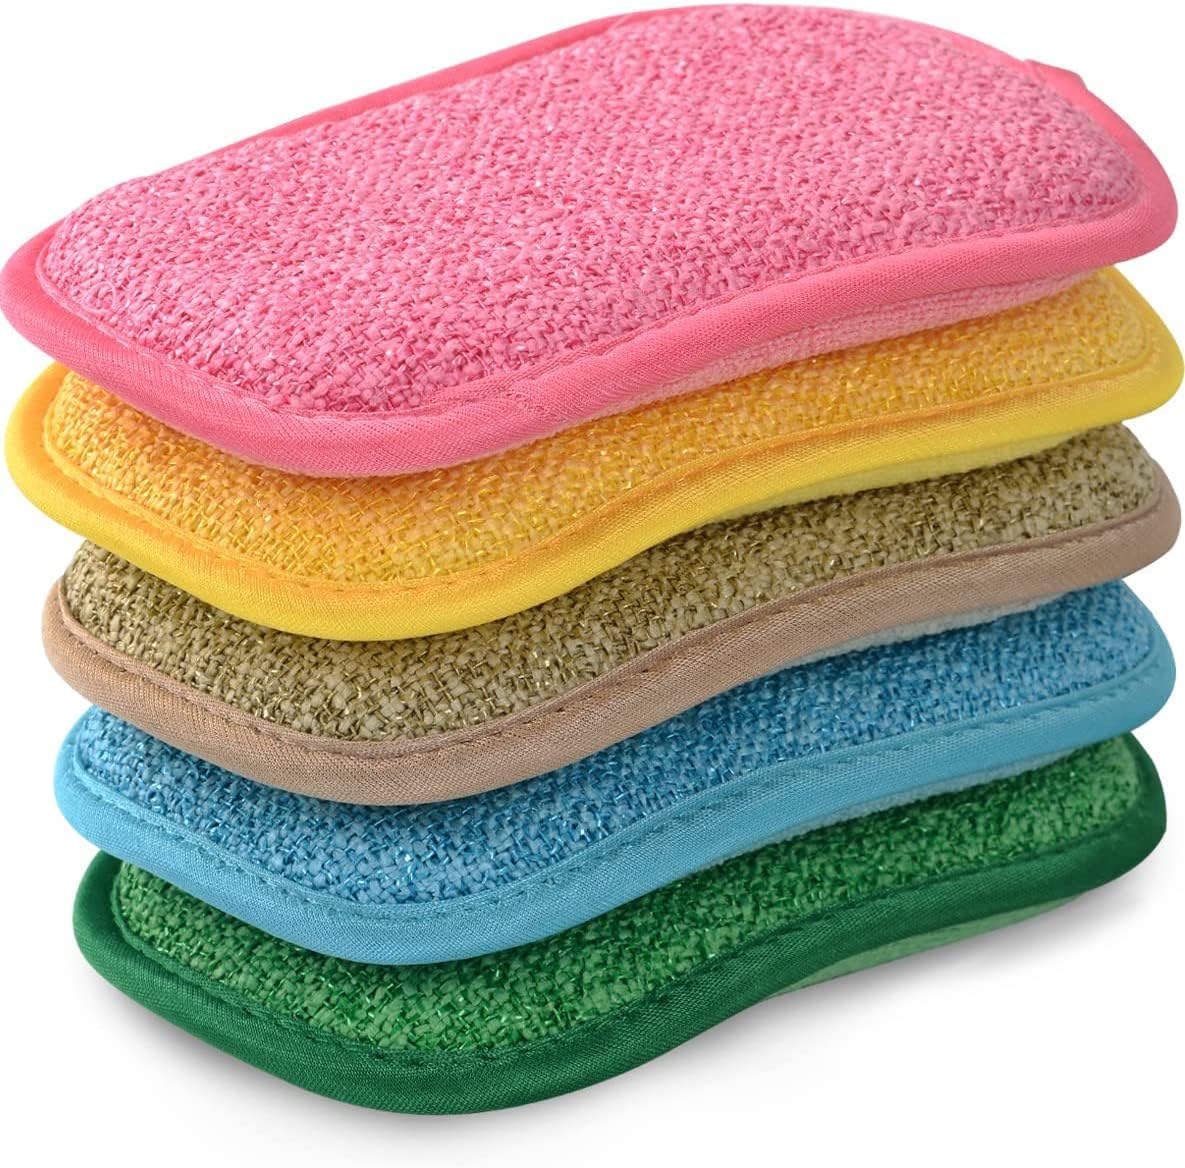 Your kitchen sponge harbors zillions of microbes. Cleaning it could make  things worse, Science